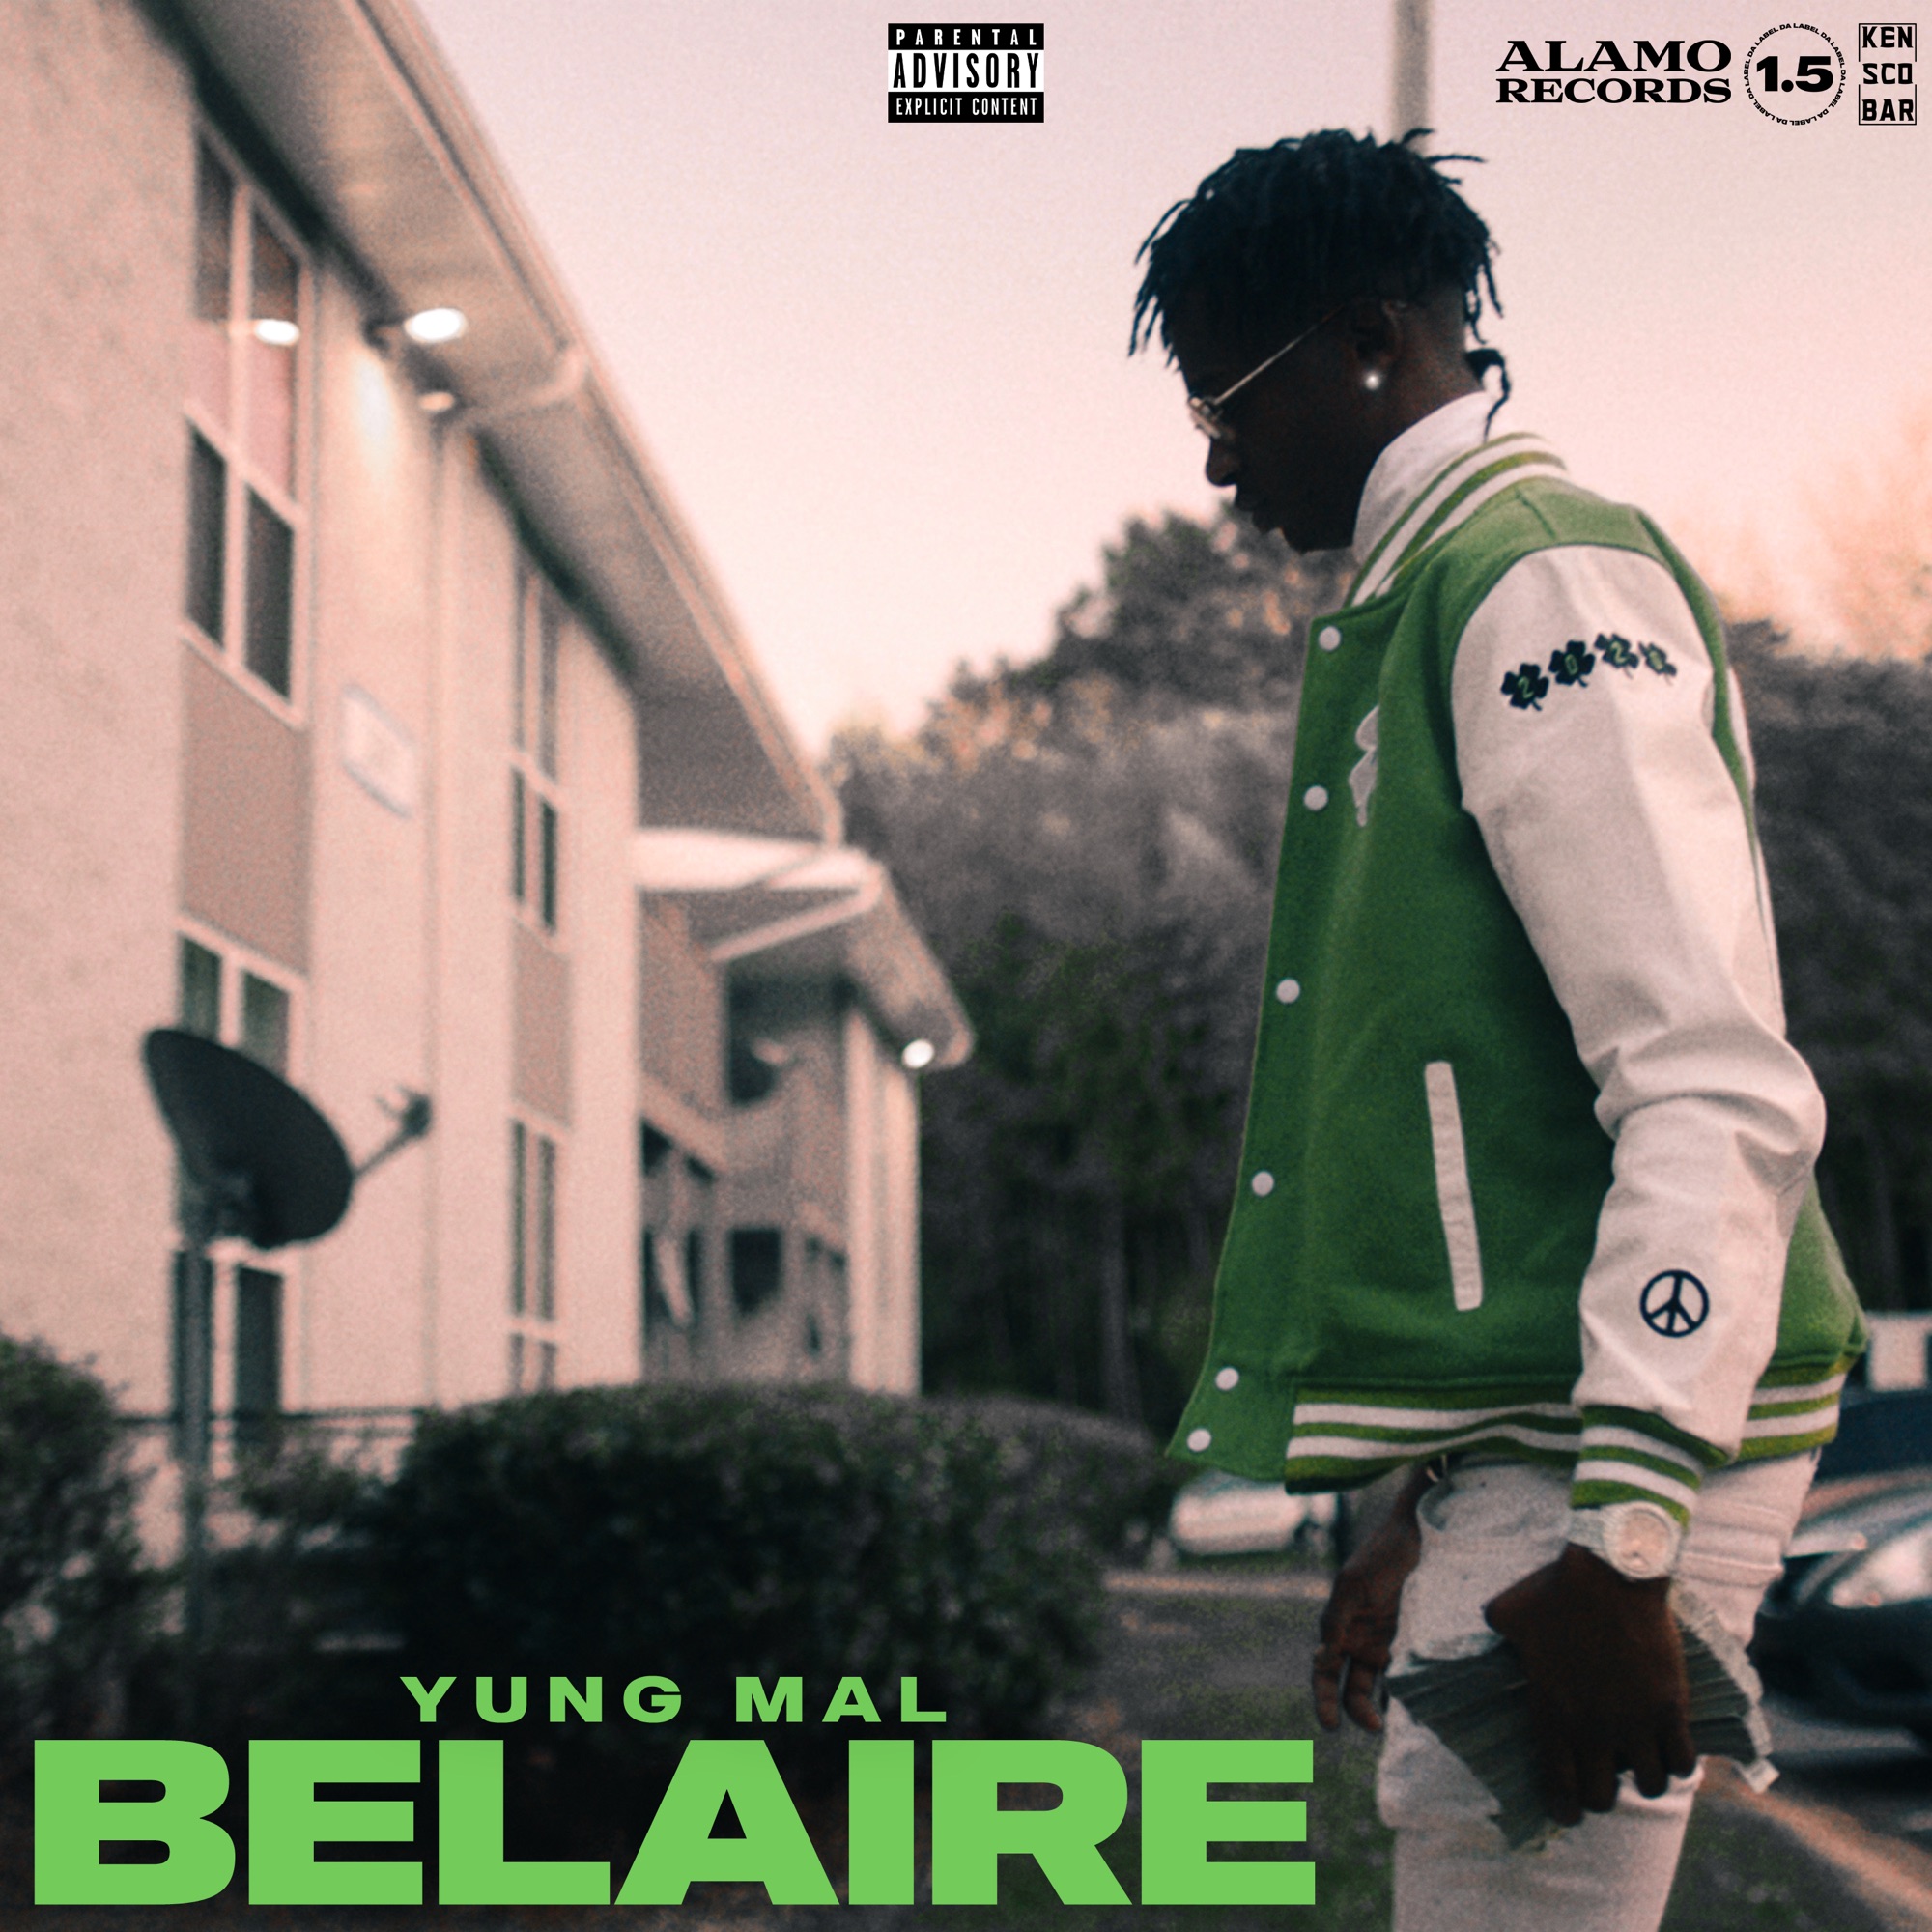 Yung Mal - Belaire - Single